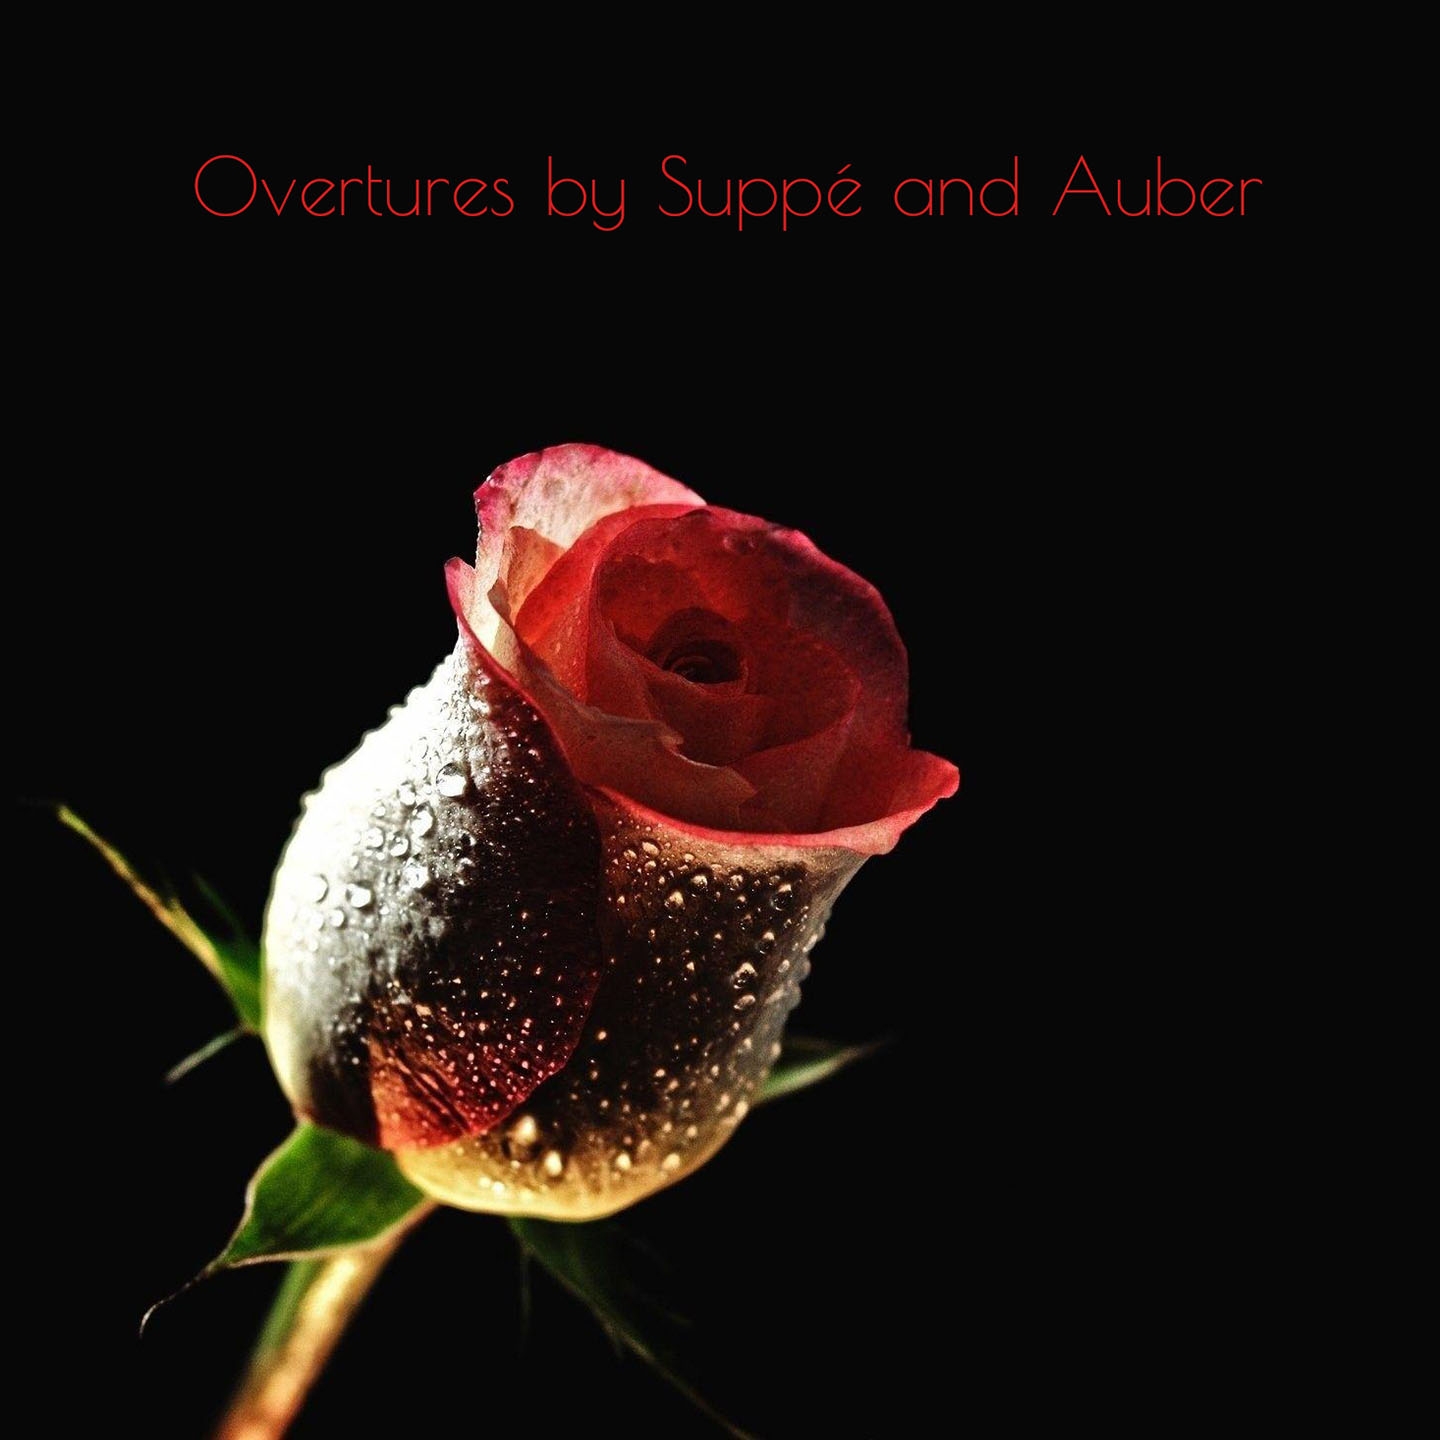 Overtures by Suppe and Auber